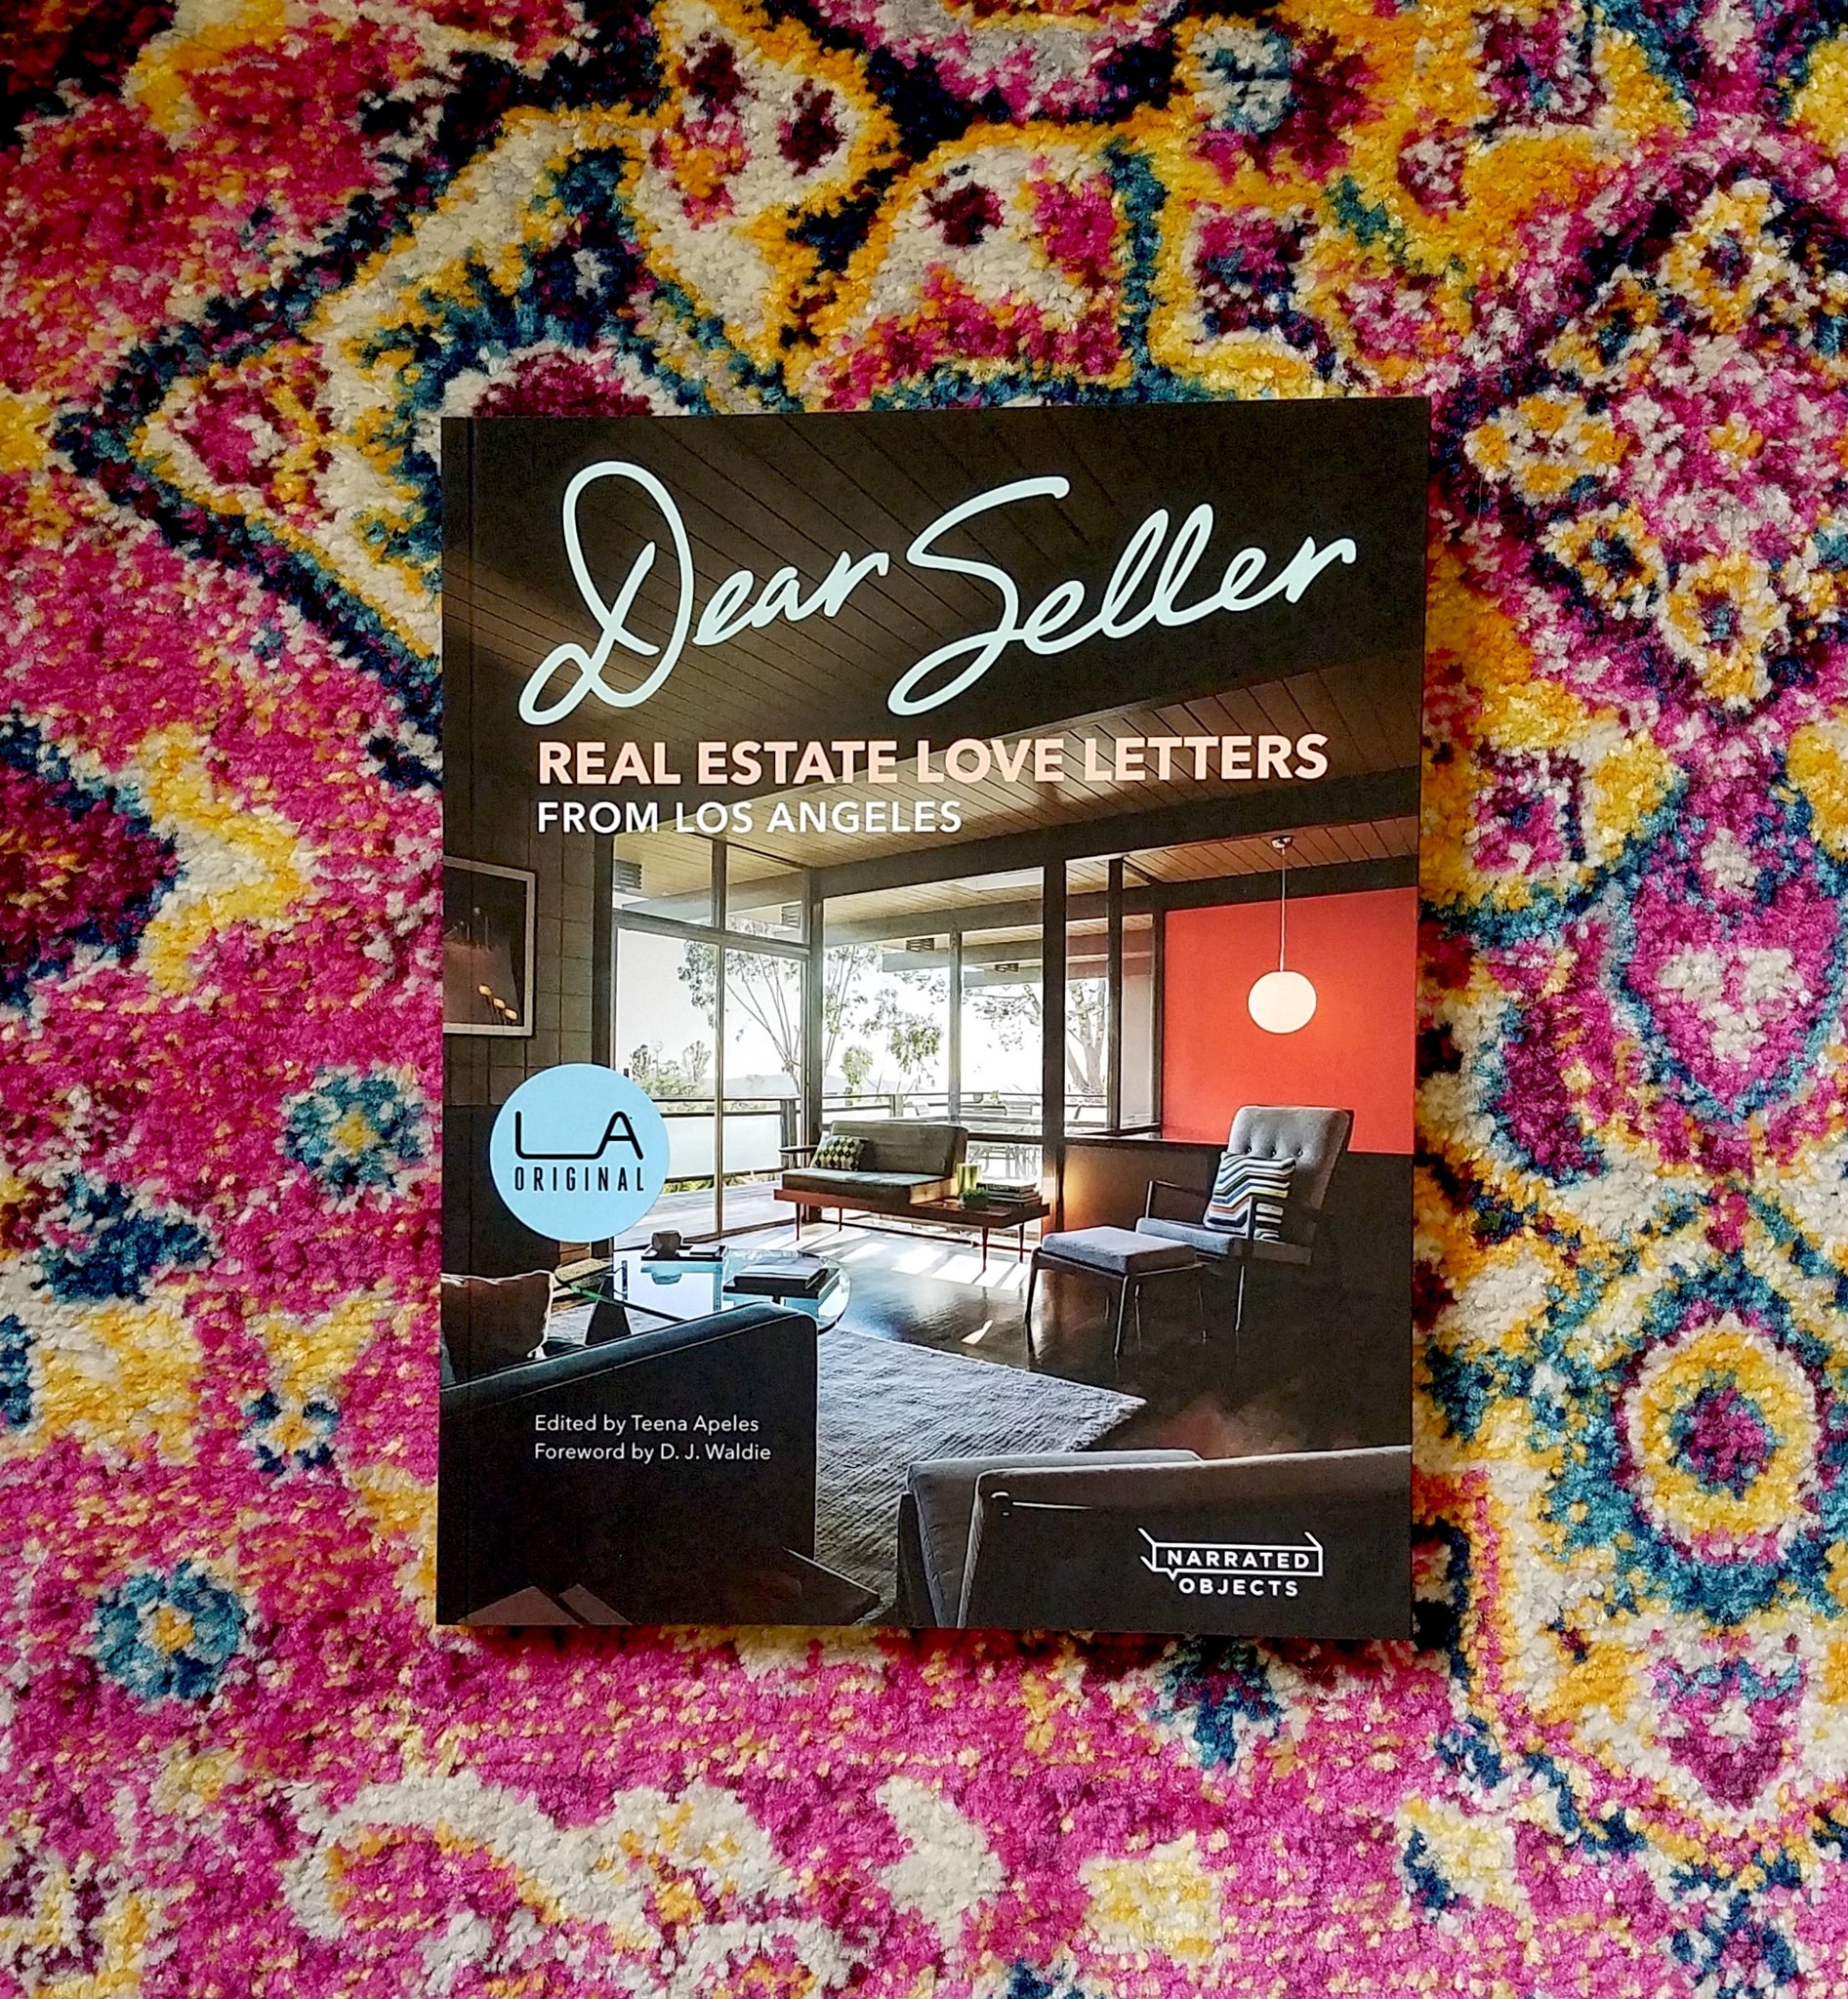 LA Original] Dear Seller: Real Estate Love Letters from Los Angeles –  Narrated Objects